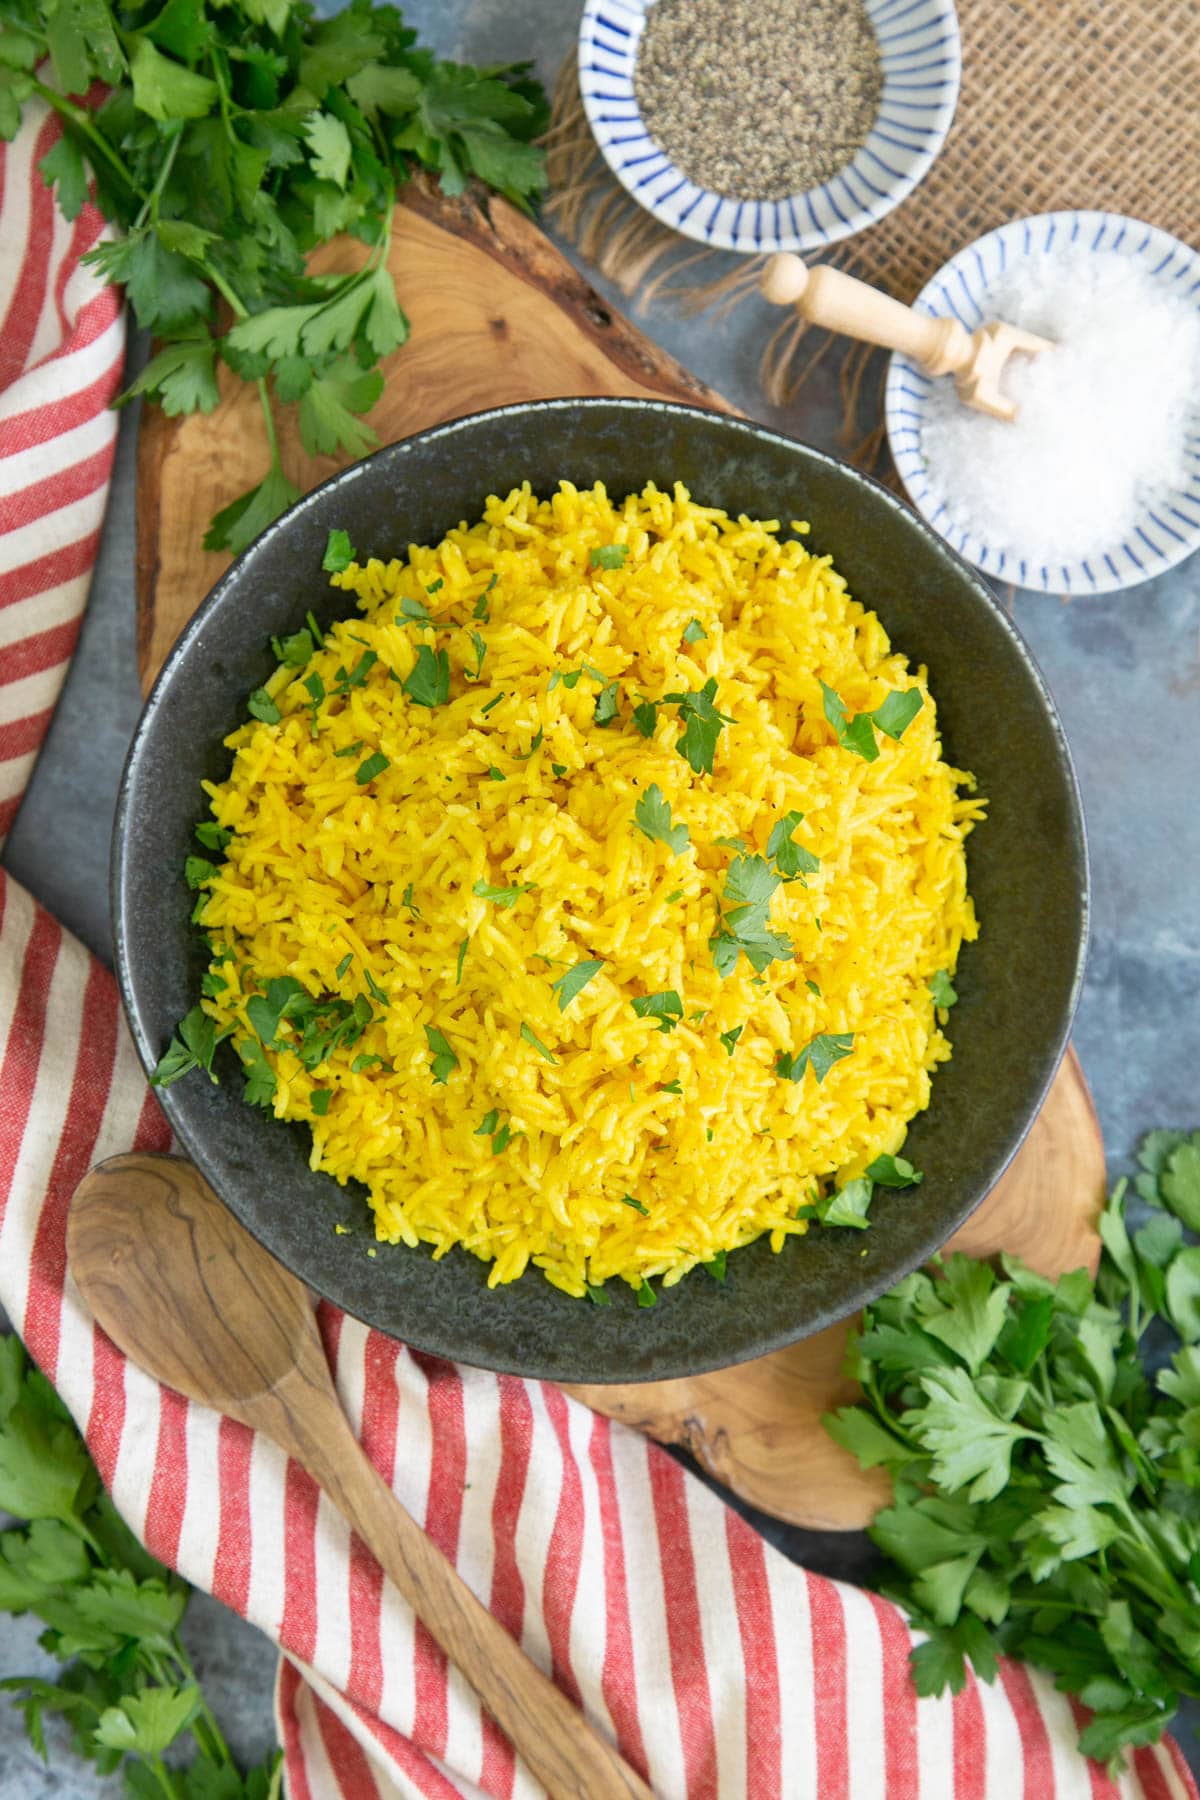 Turmeric rice makes a bright and cheerful addition to table laid with a colourful red and white cloth.